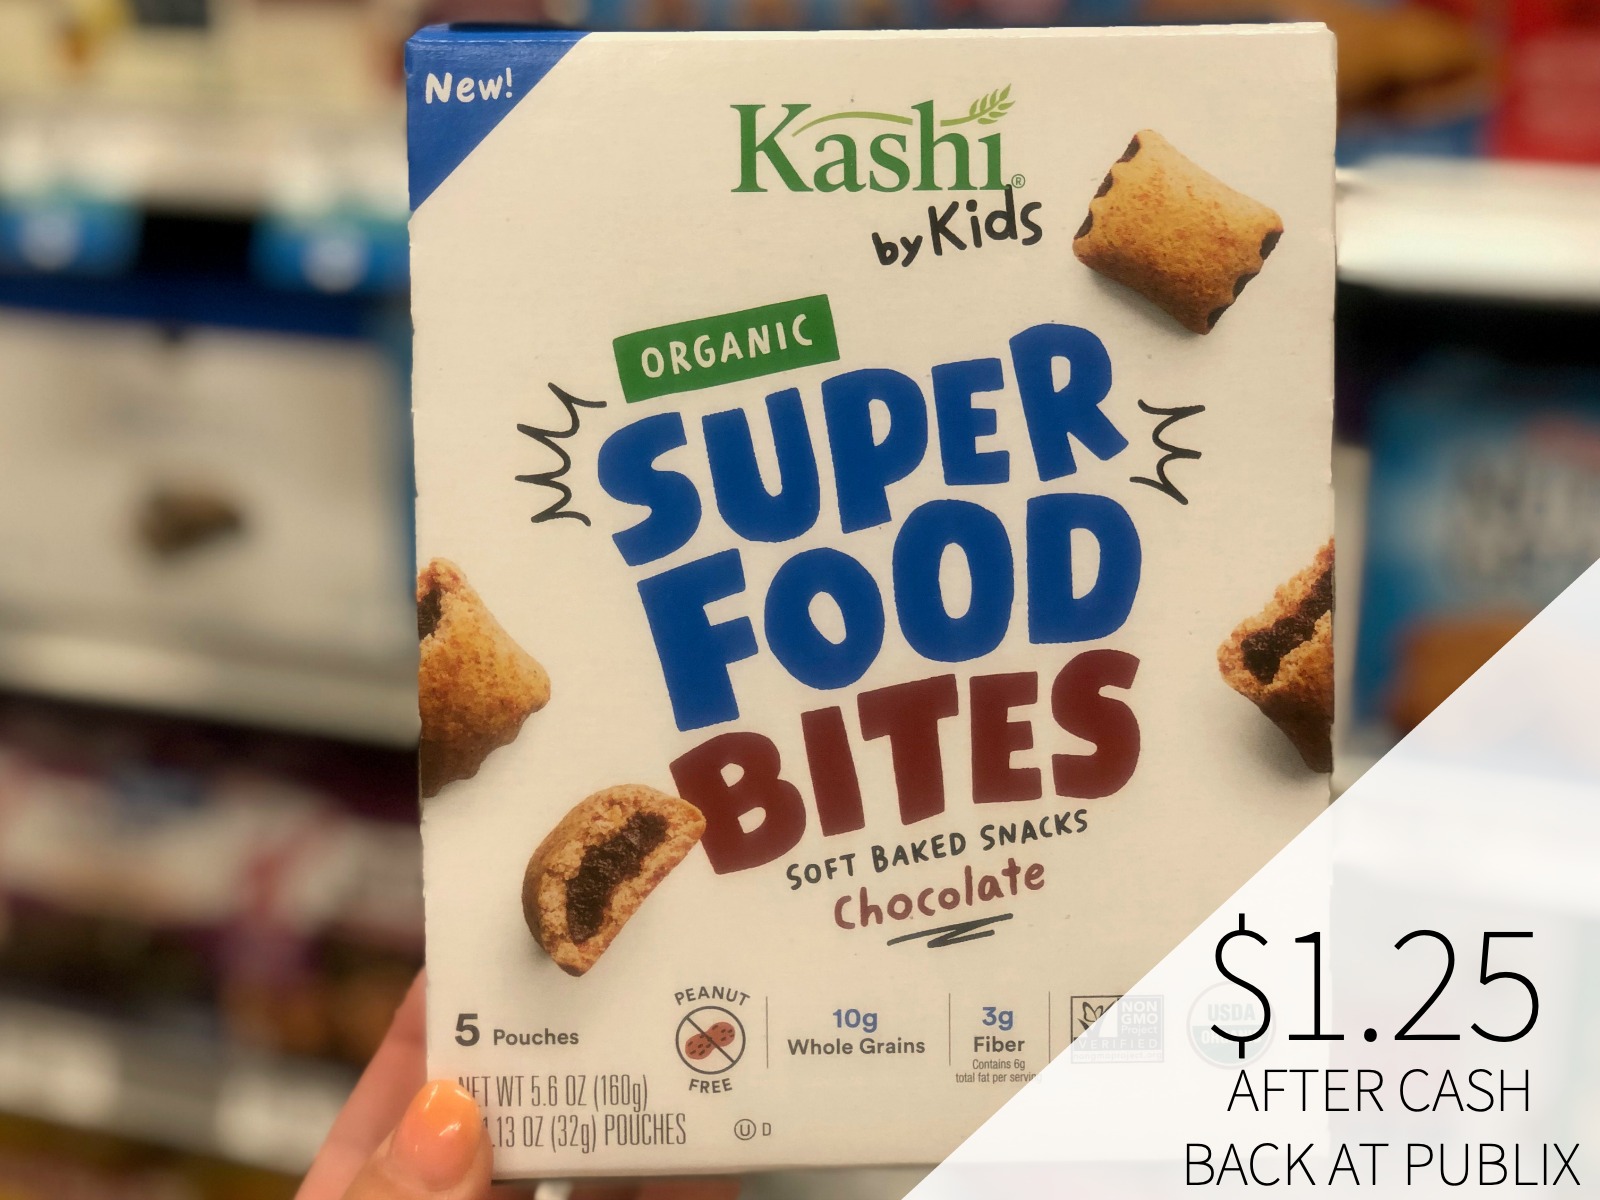 Kashi By Kids Snack Bites As Low As $1.25 Per Box on I Heart Publix